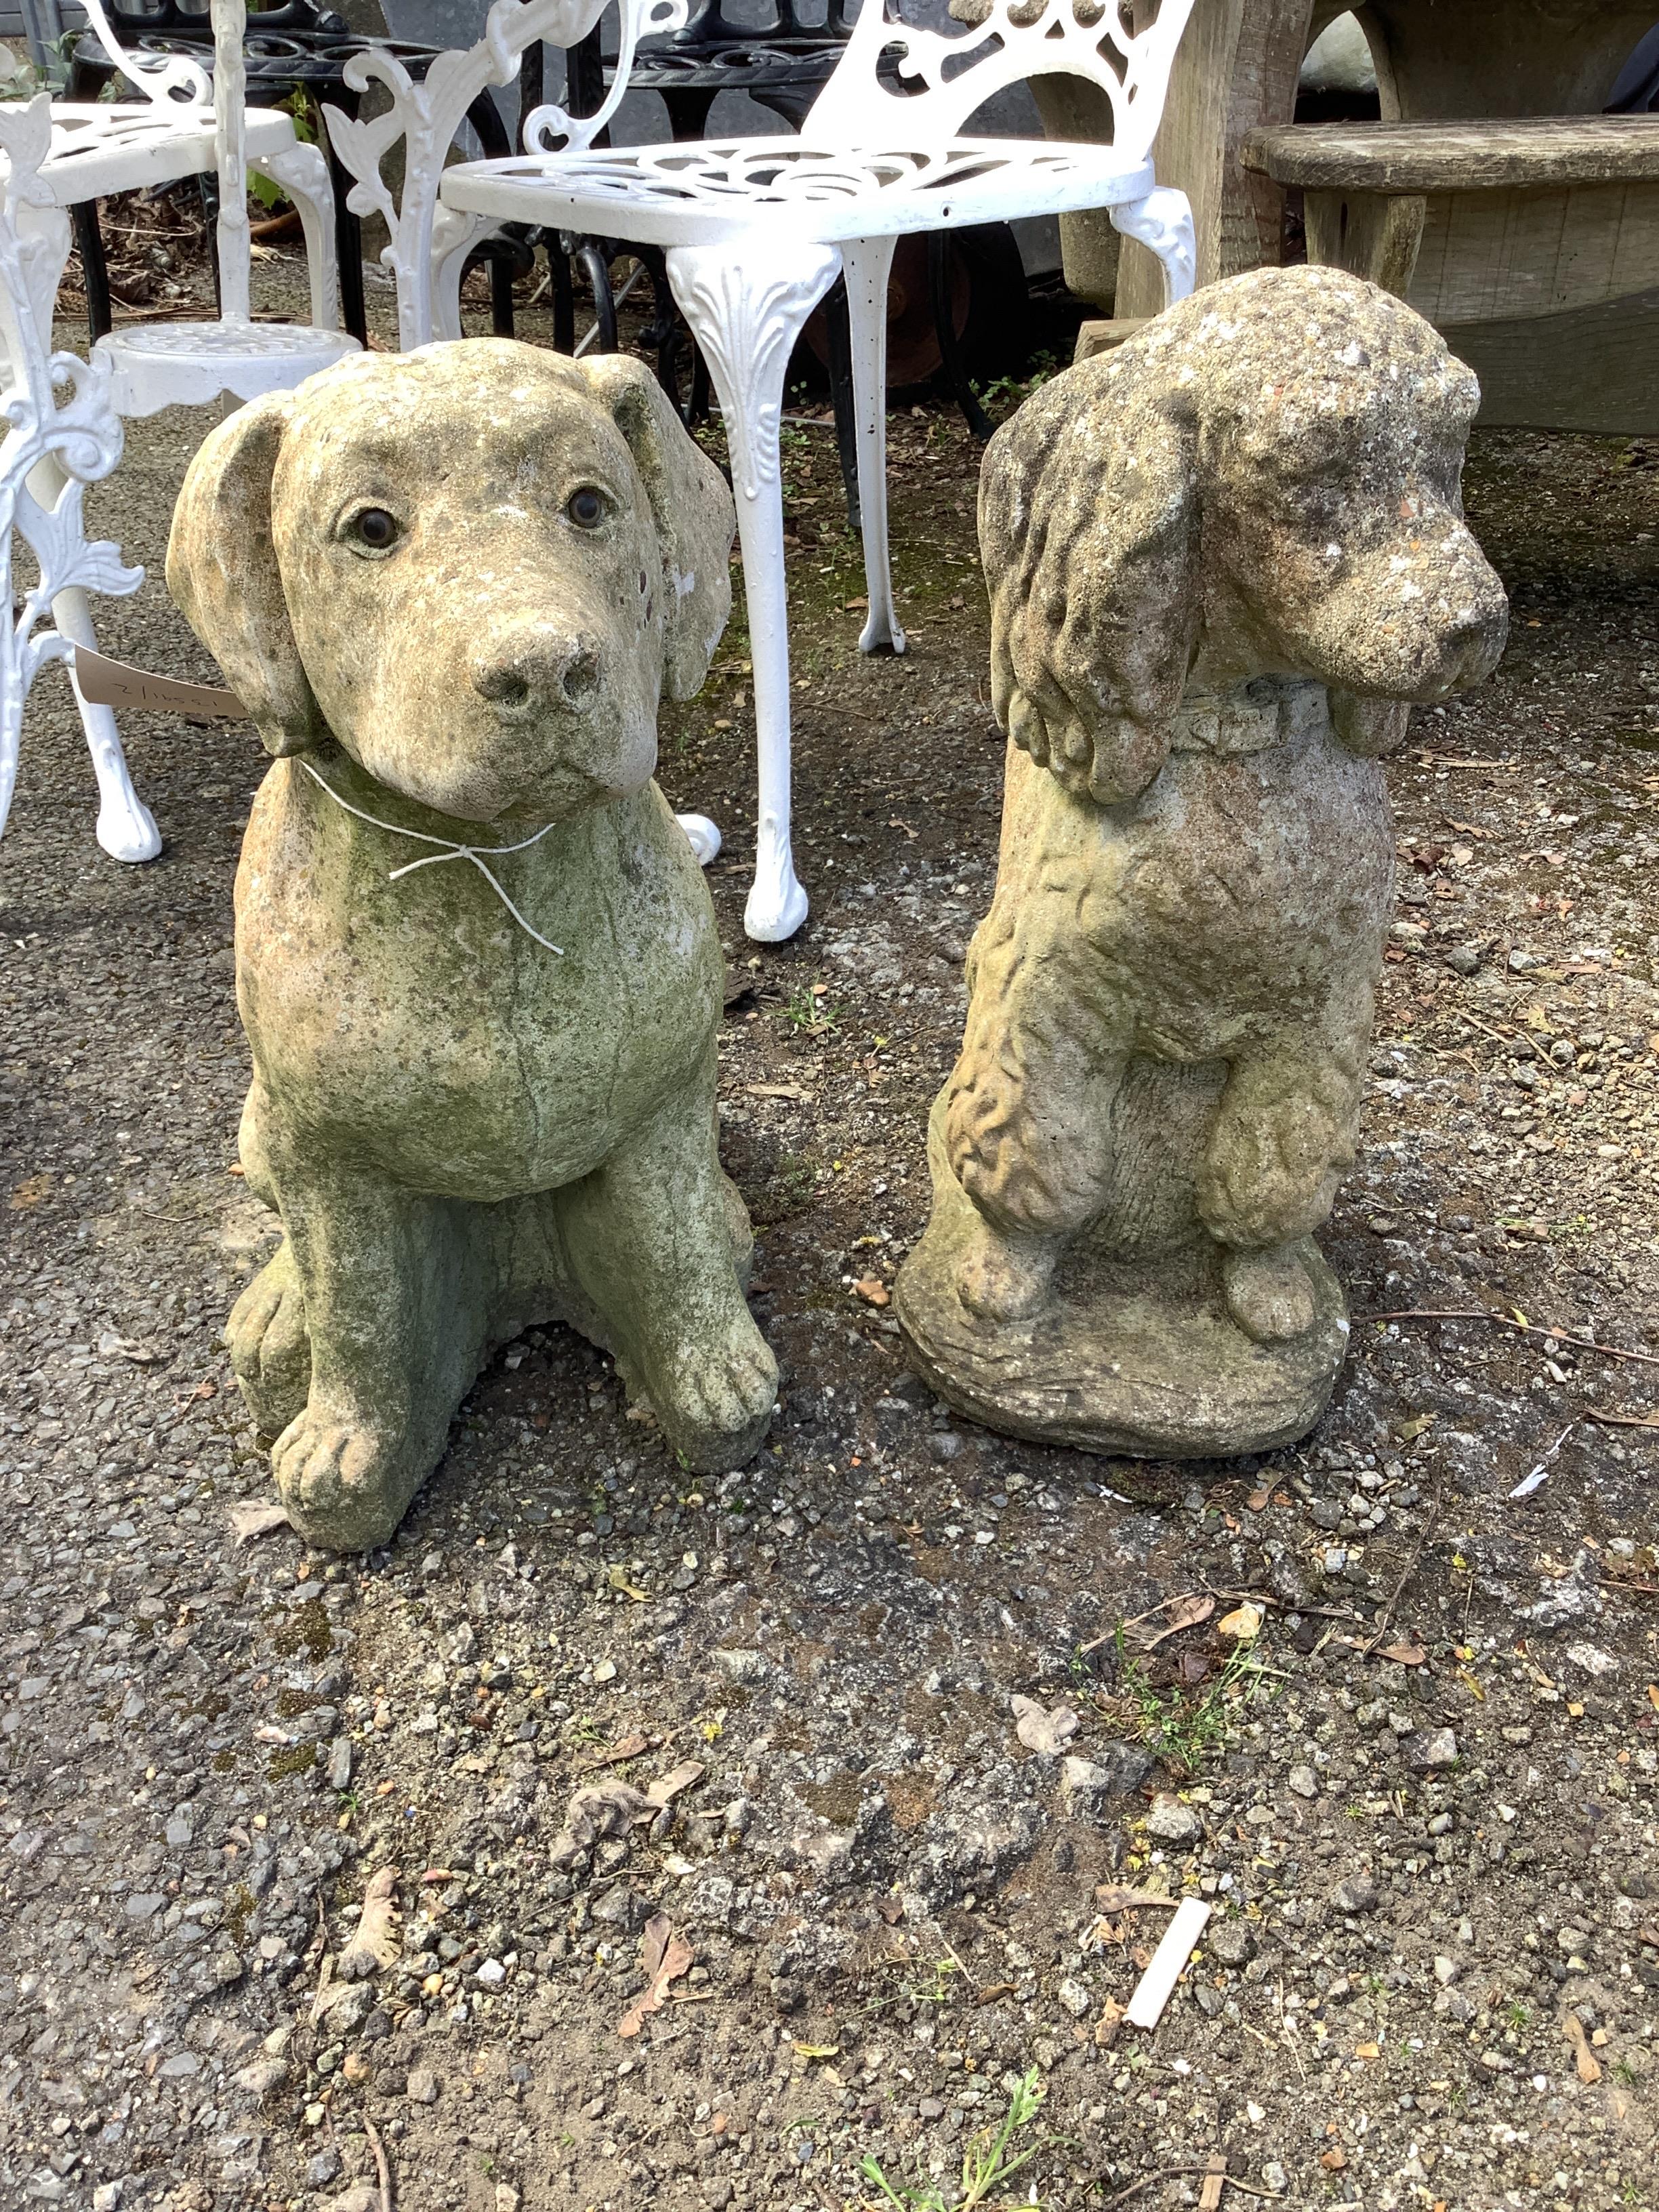 Two reconstituted stone seated dog garden ornaments, larger height 50cm